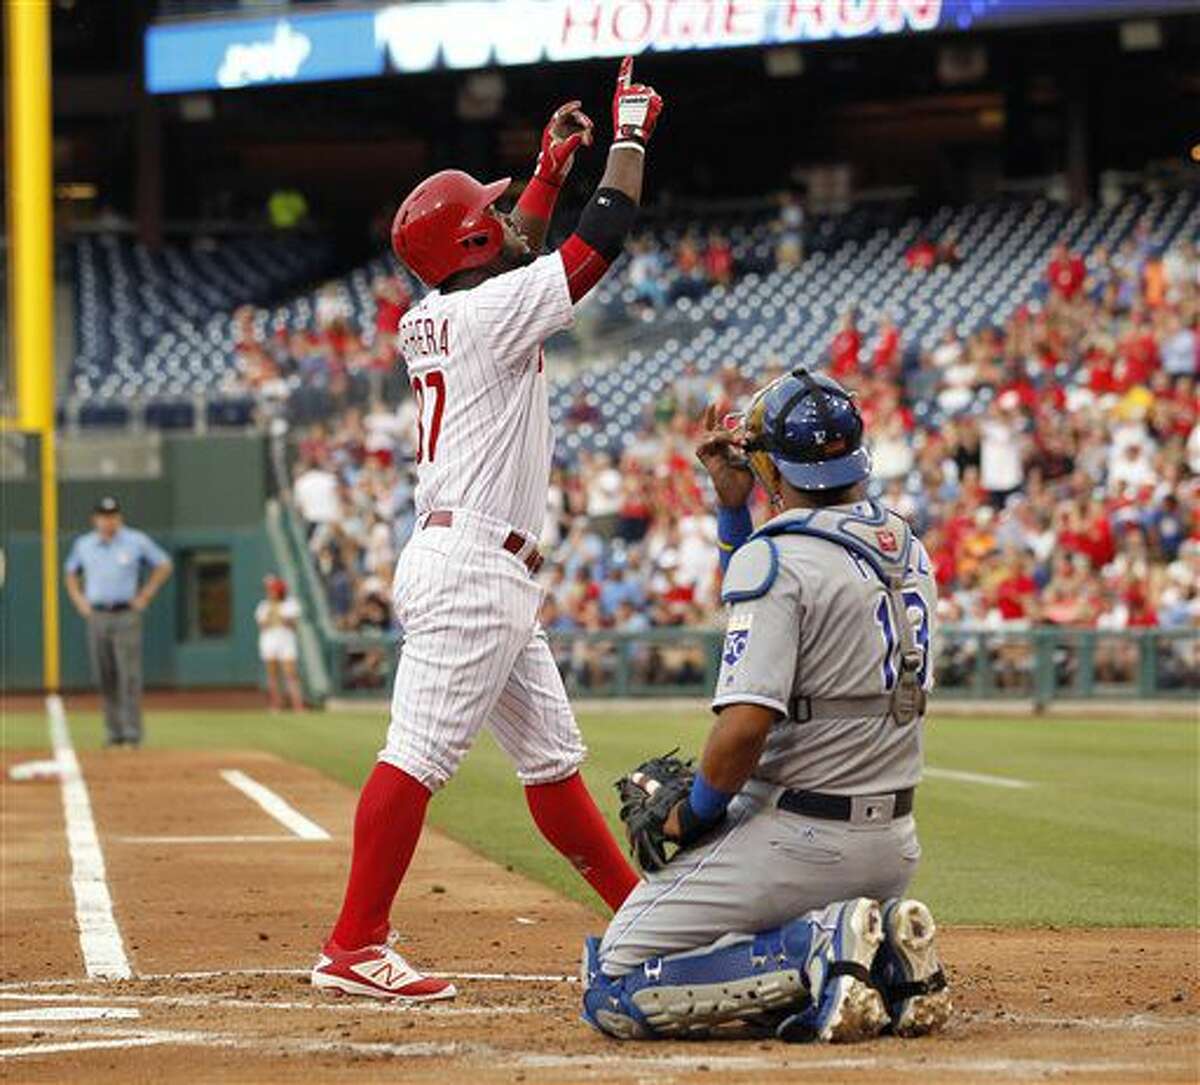 Philadelphia Phillies' Odubel Herrera, left, points skyward as he walks past Kansas City Royals catcher Salvador Perez after hitting a solo home run during the first inning of a baseball game Friday, July 1, 2016, in Philadelphia. (AP Photo/Tom Mihalek)